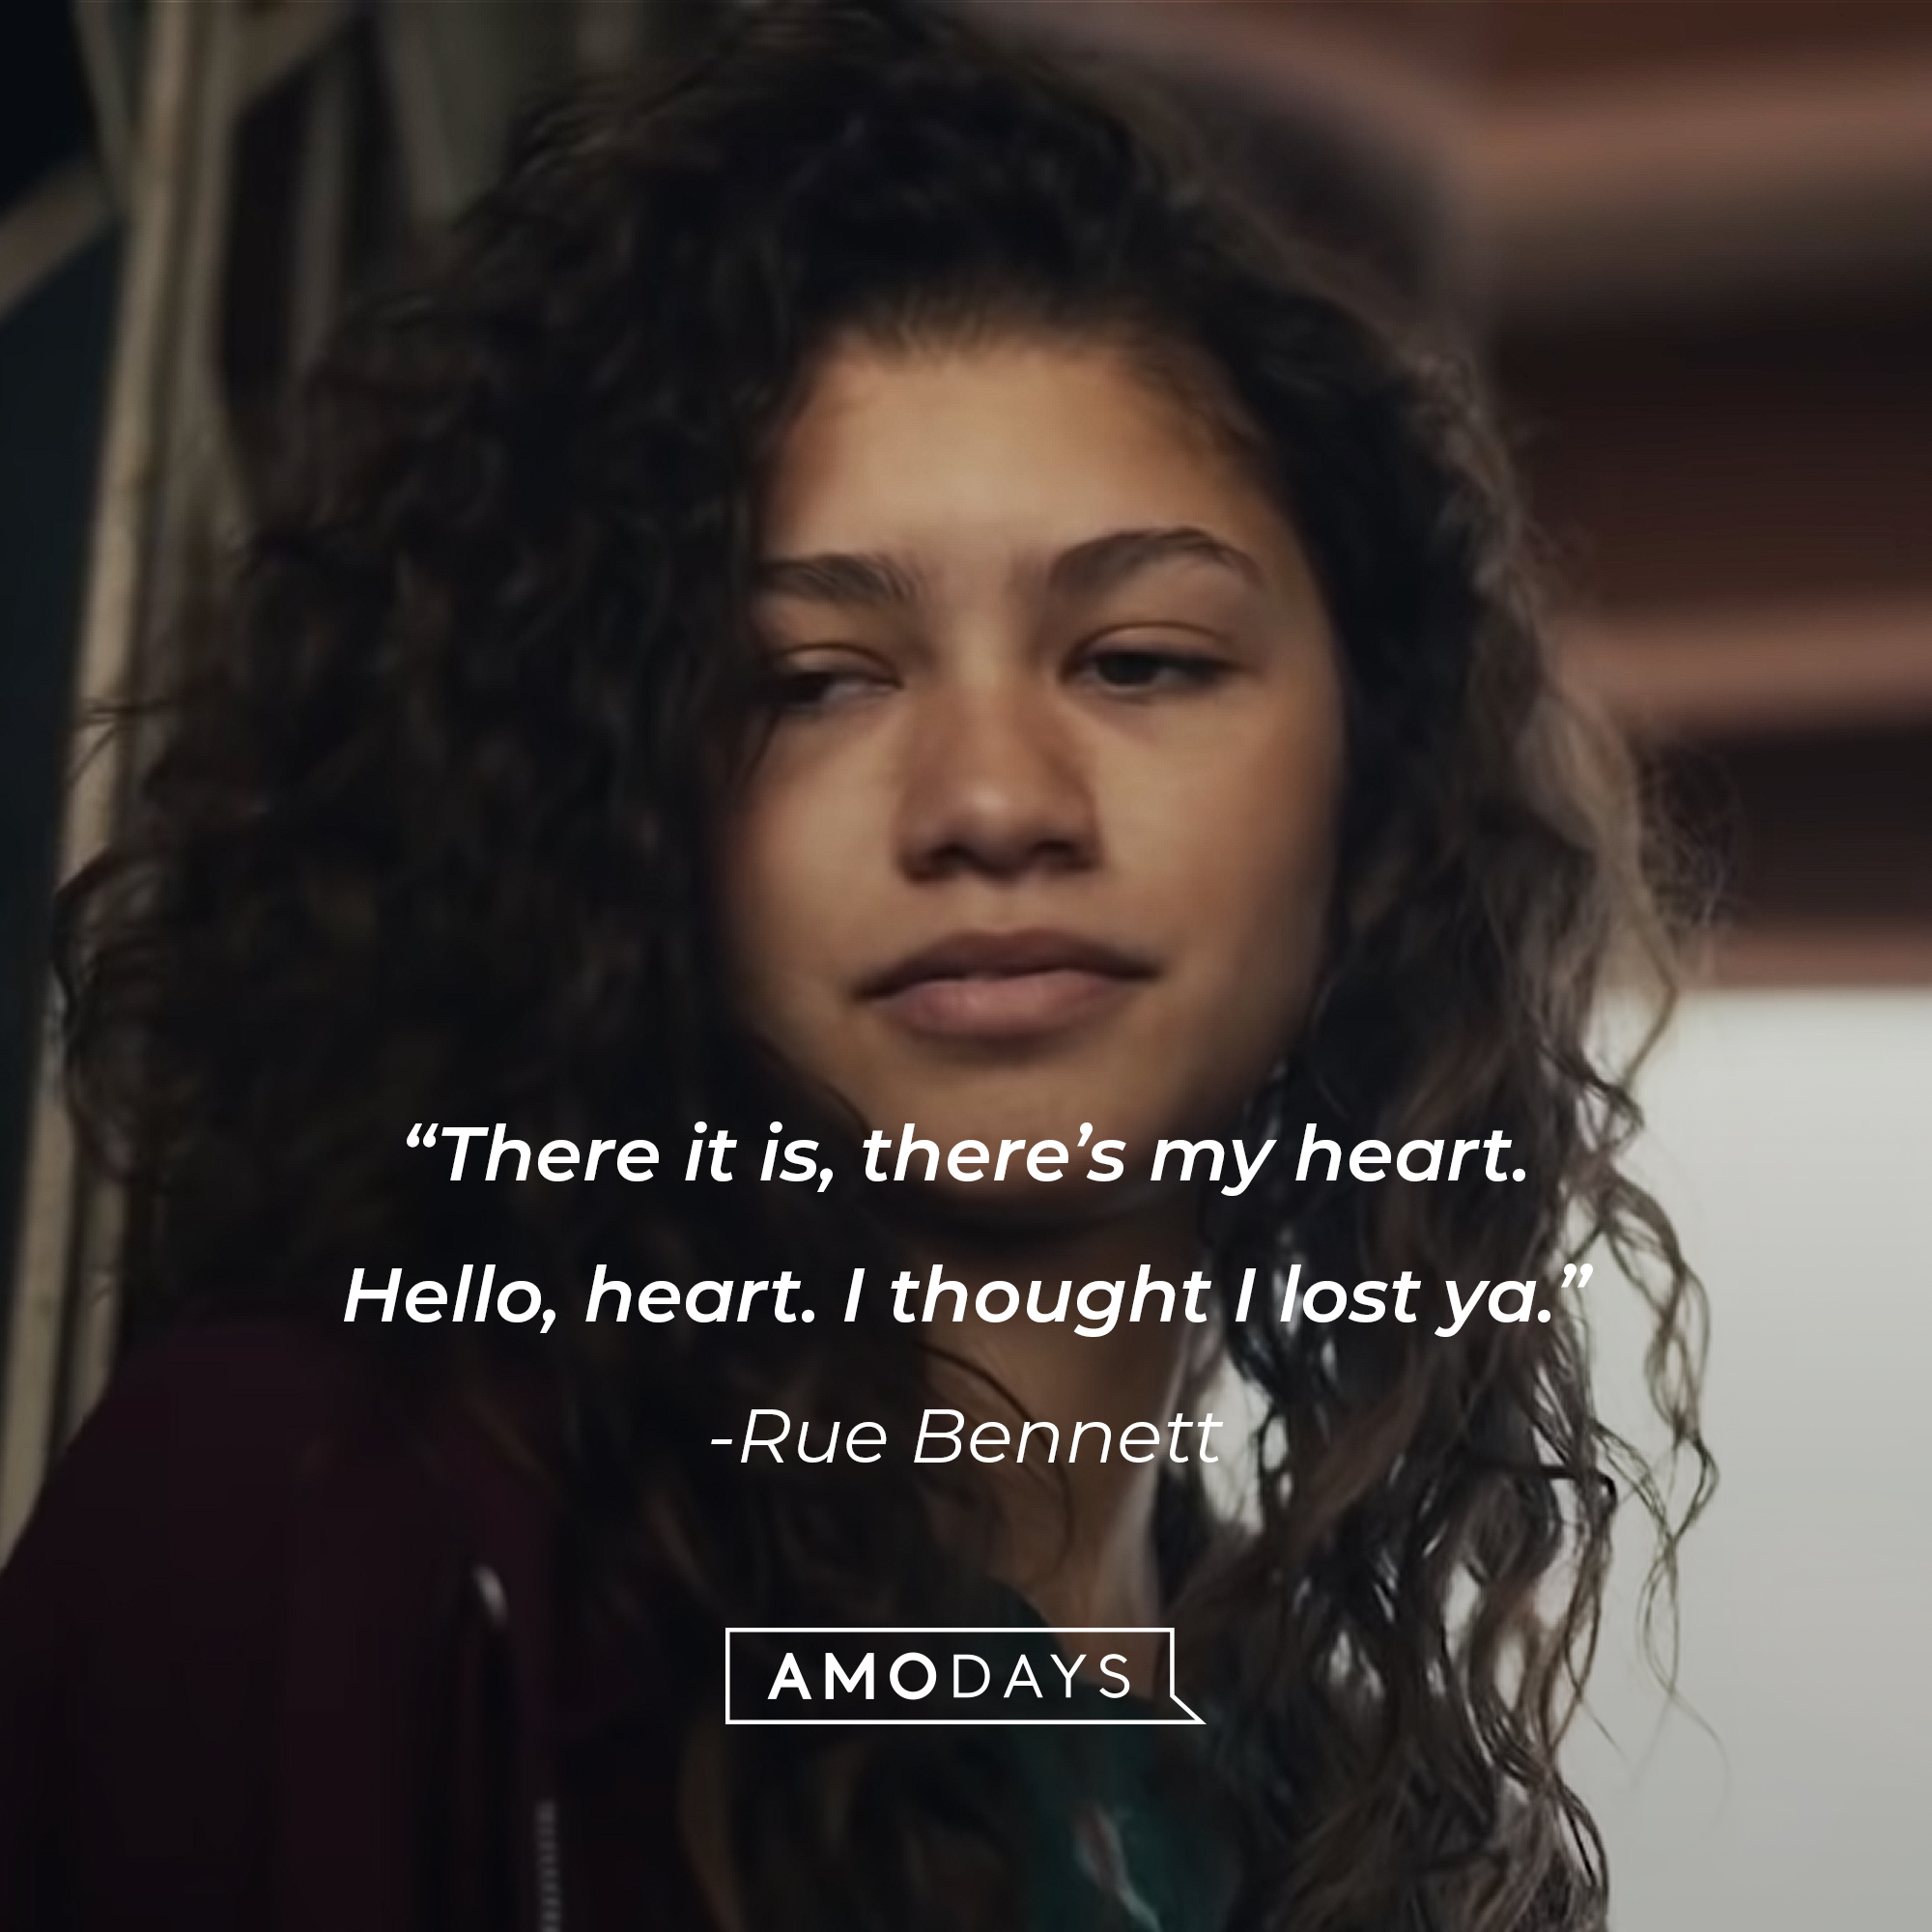 An image of Rue Bennett,  with her quote: “There it is, there’s my heart. Hello, heart. I thought I lost ya.” | Source: HBO